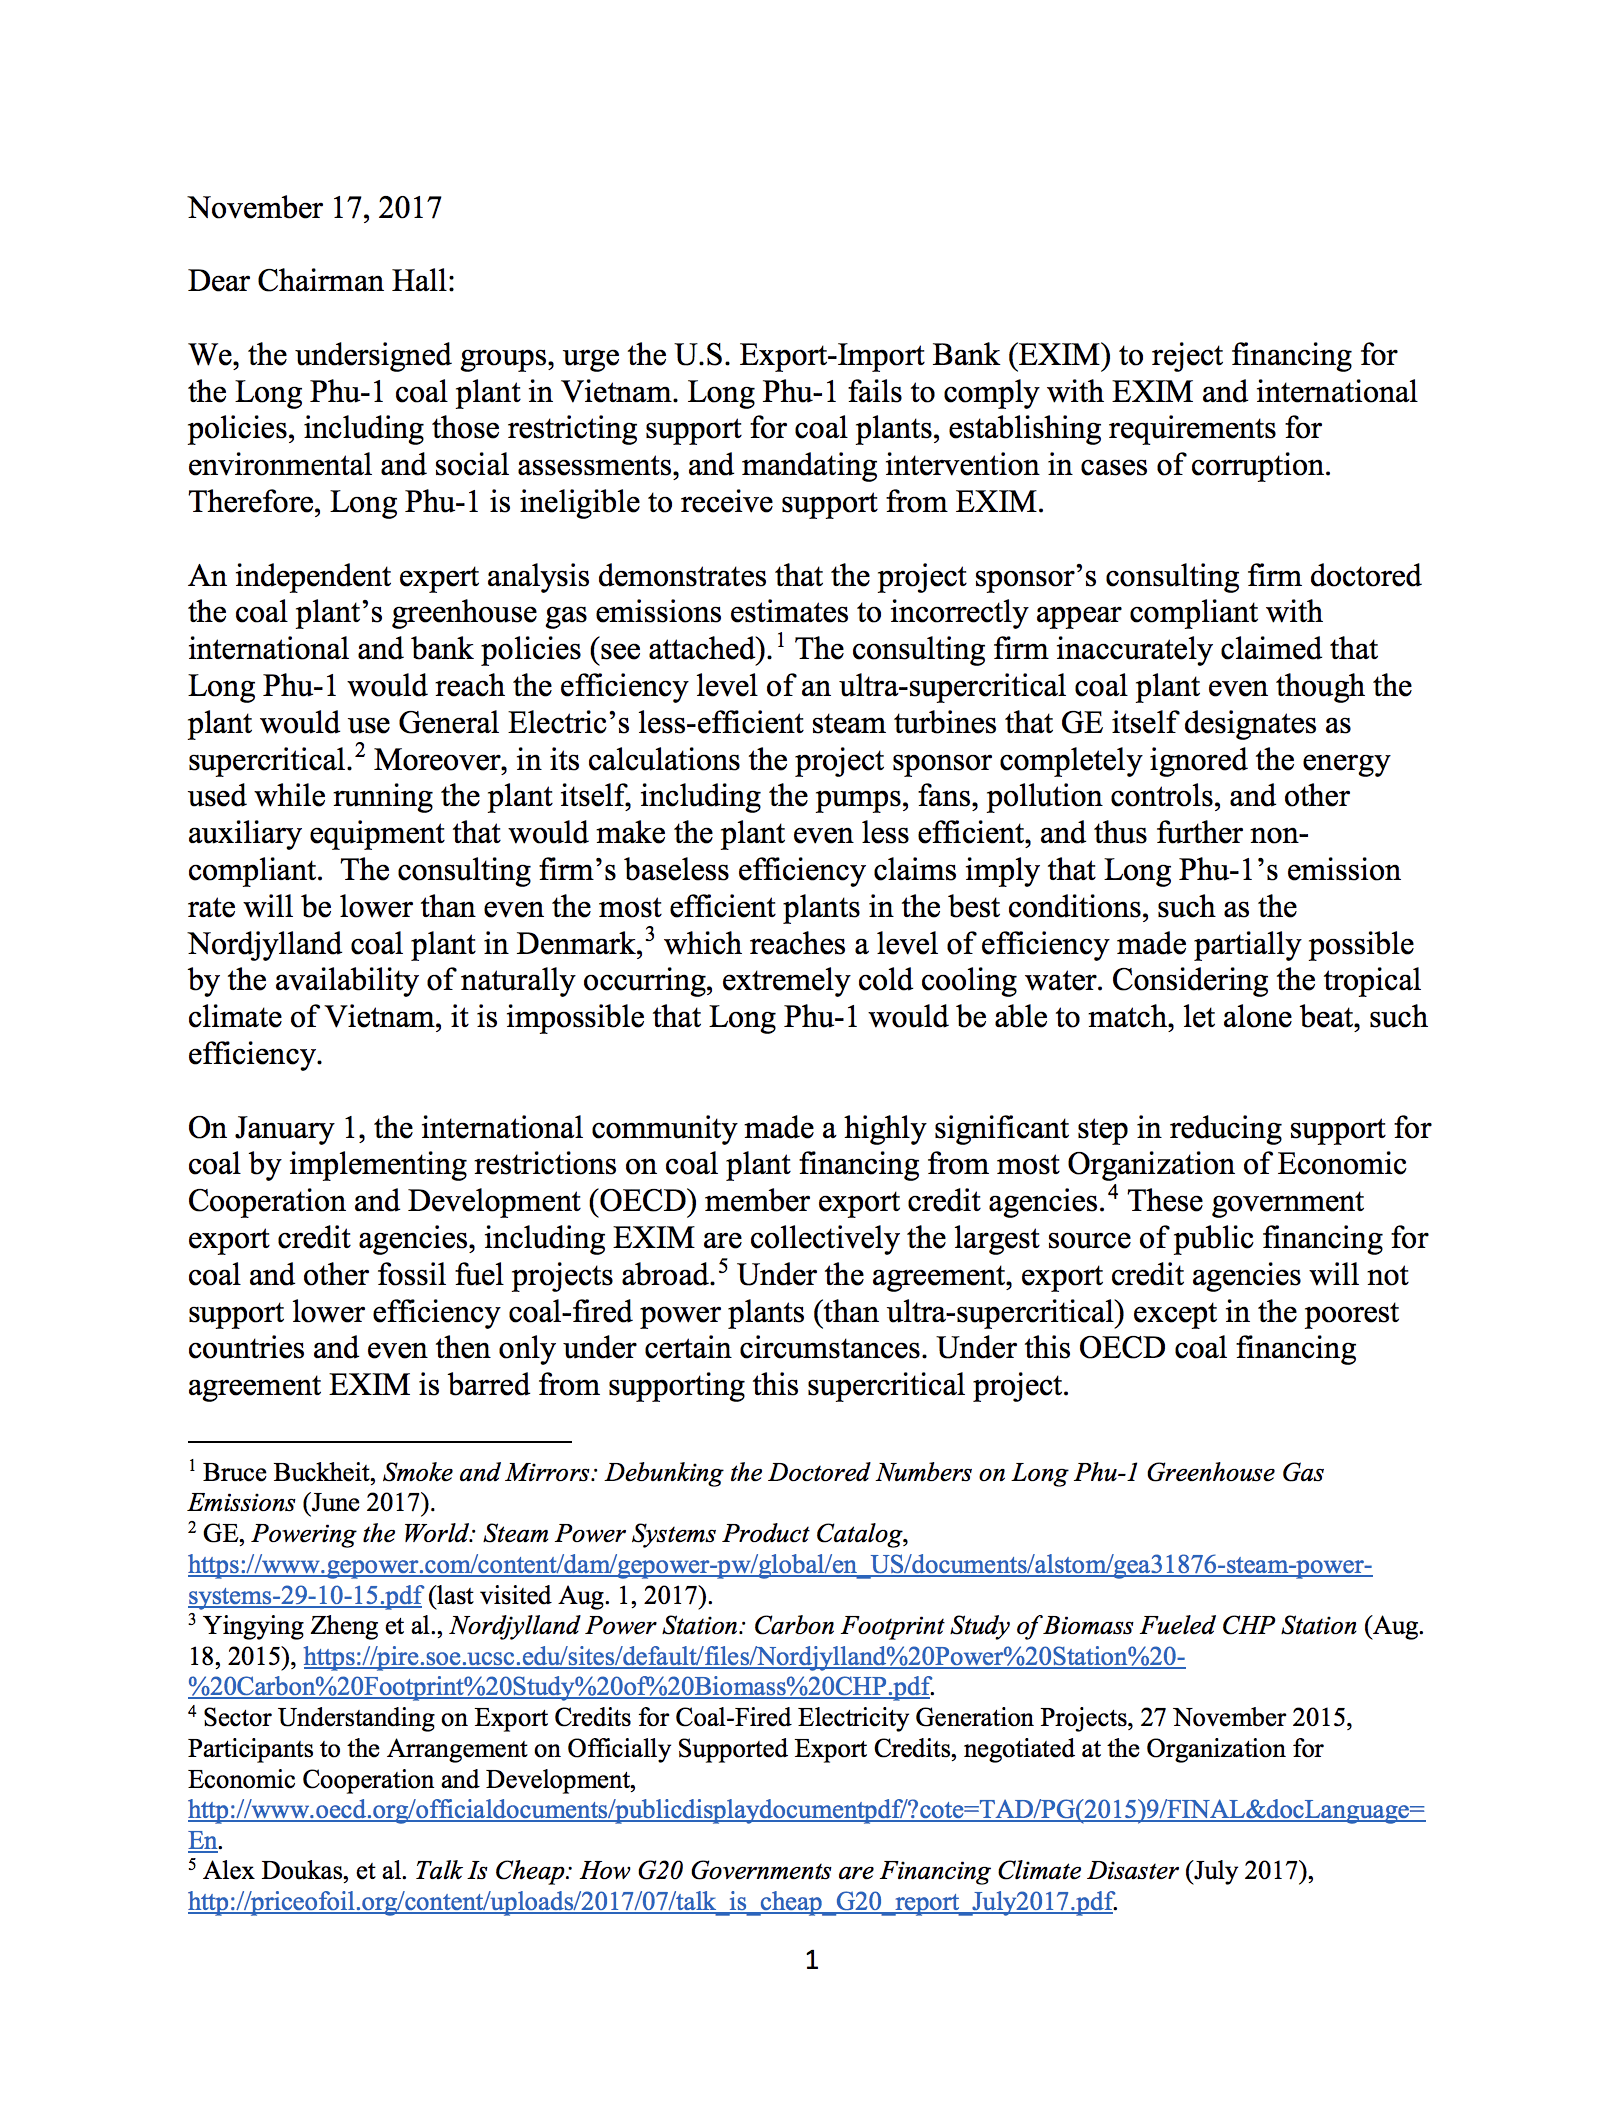 Letter to Ex-Im Bank